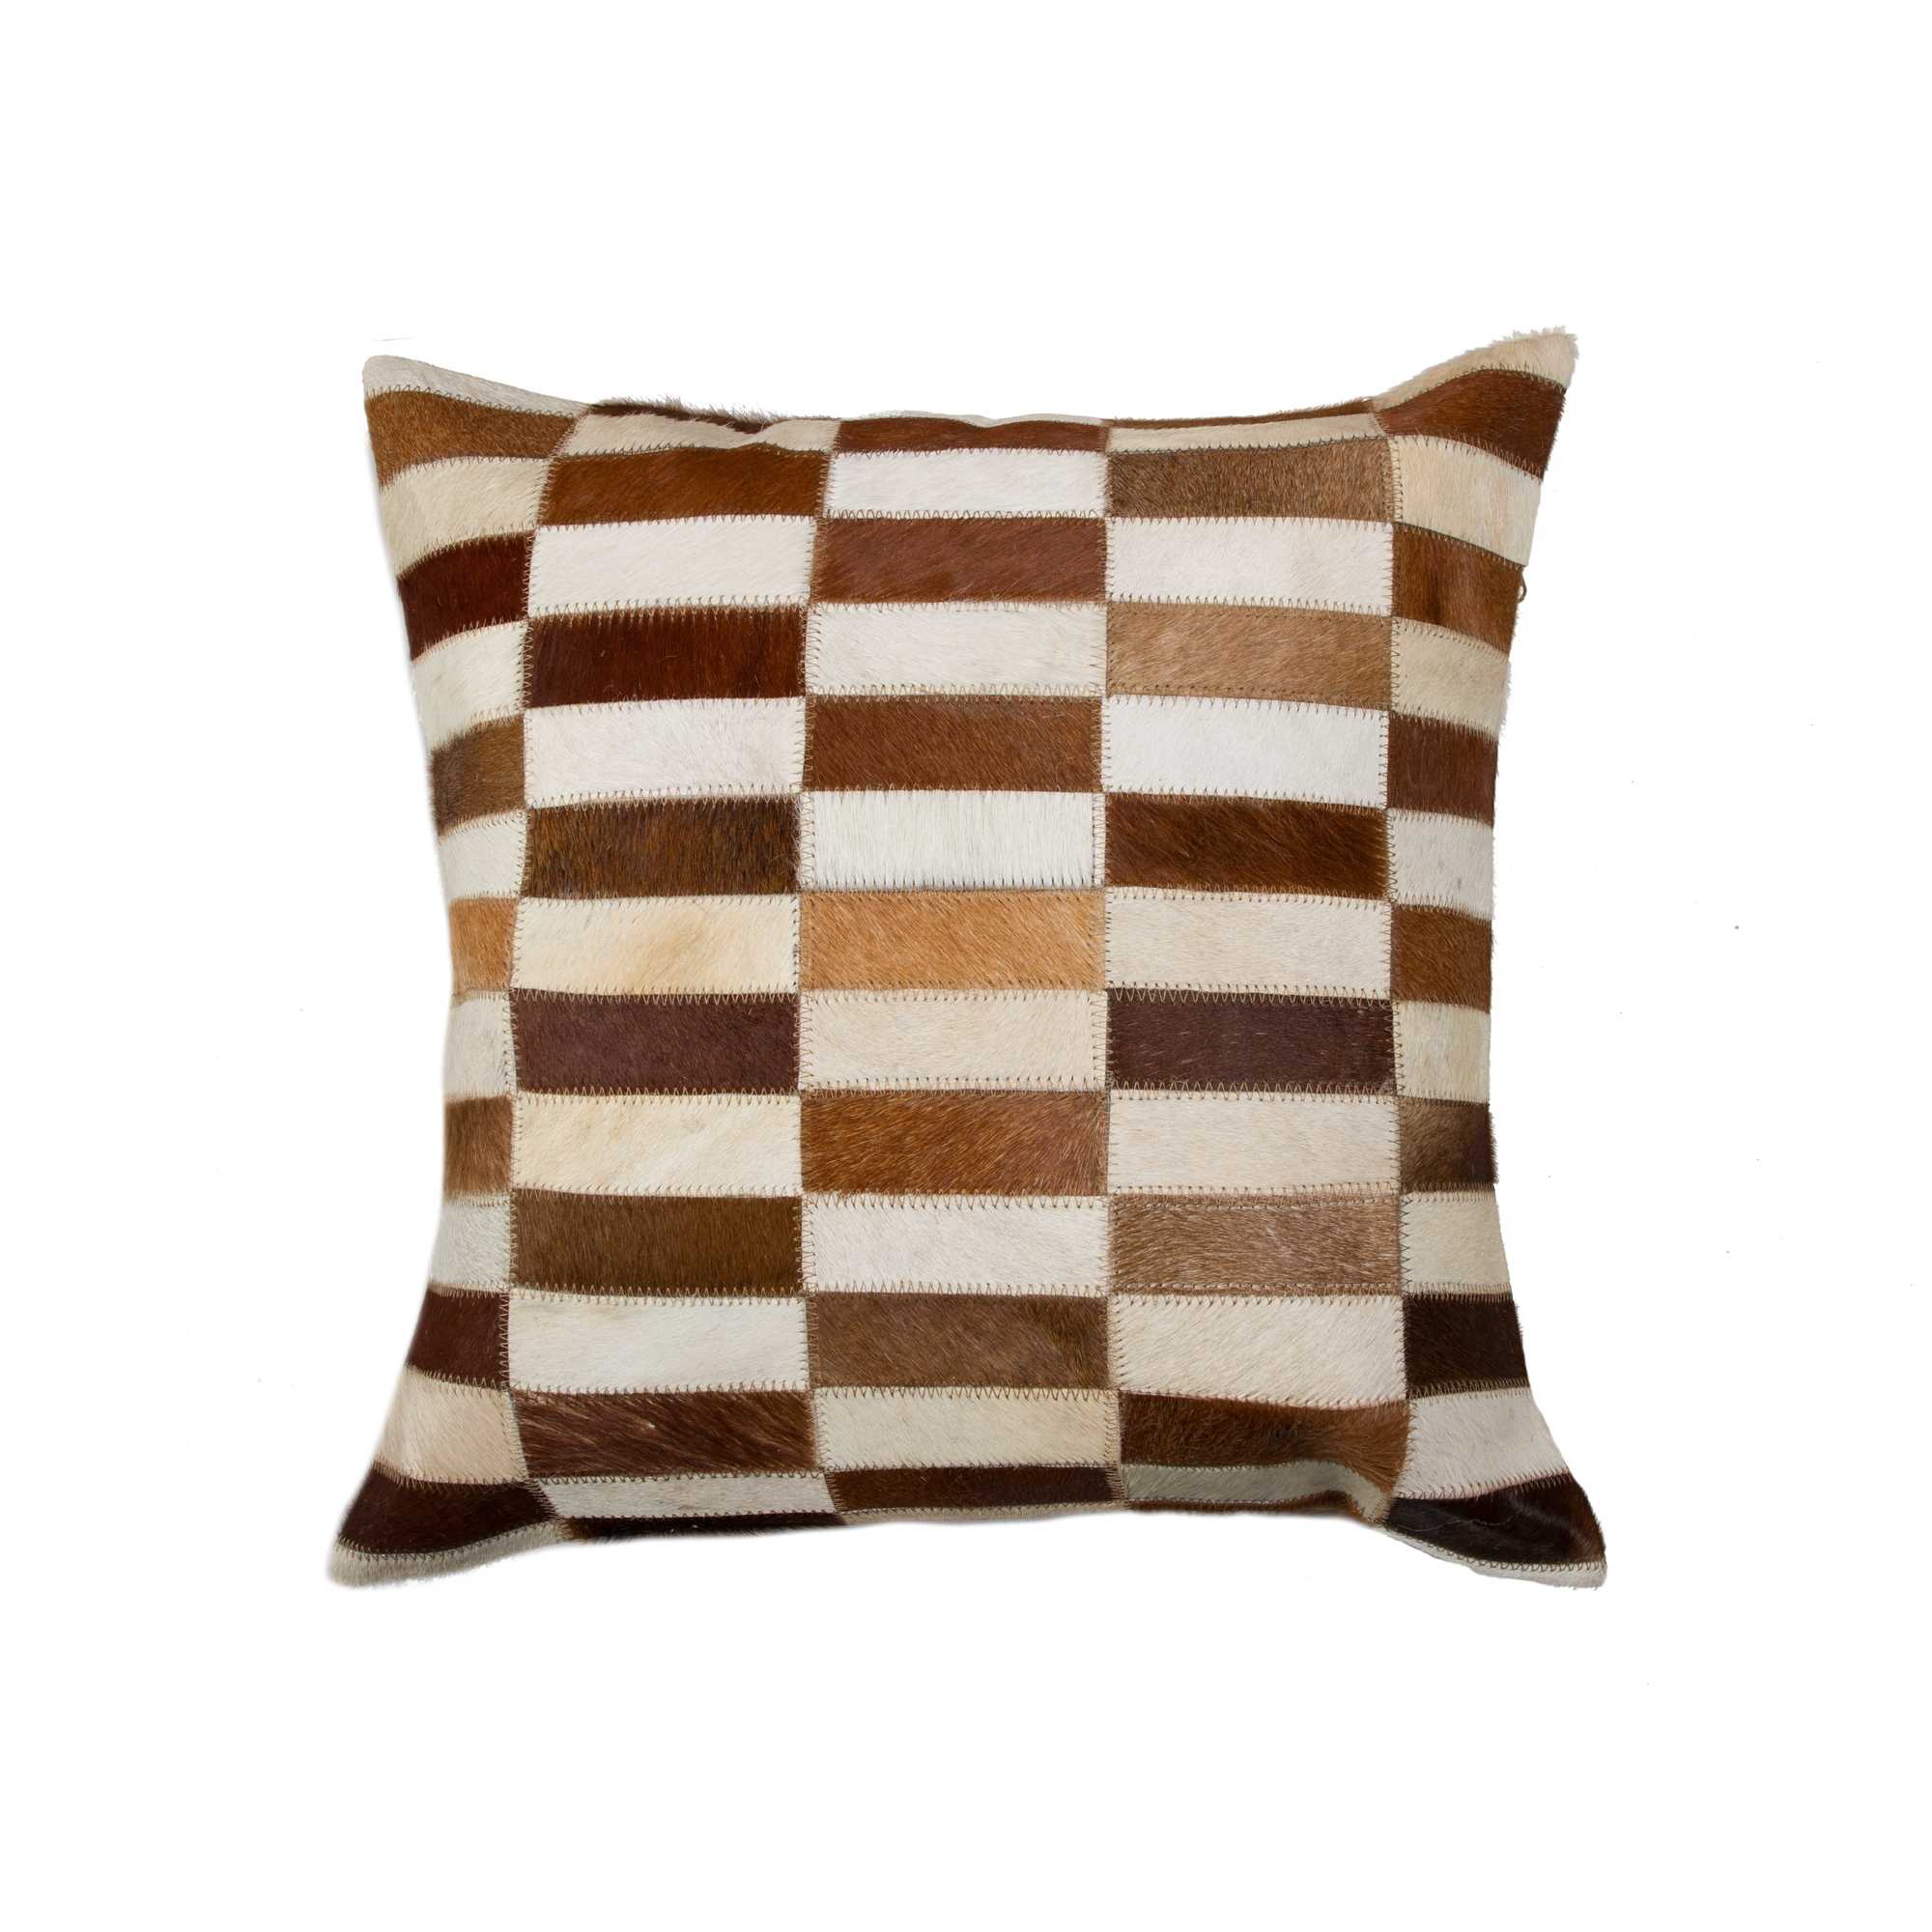 18" x 18" x 5" Brown And White Linear Cowhide - Pillow